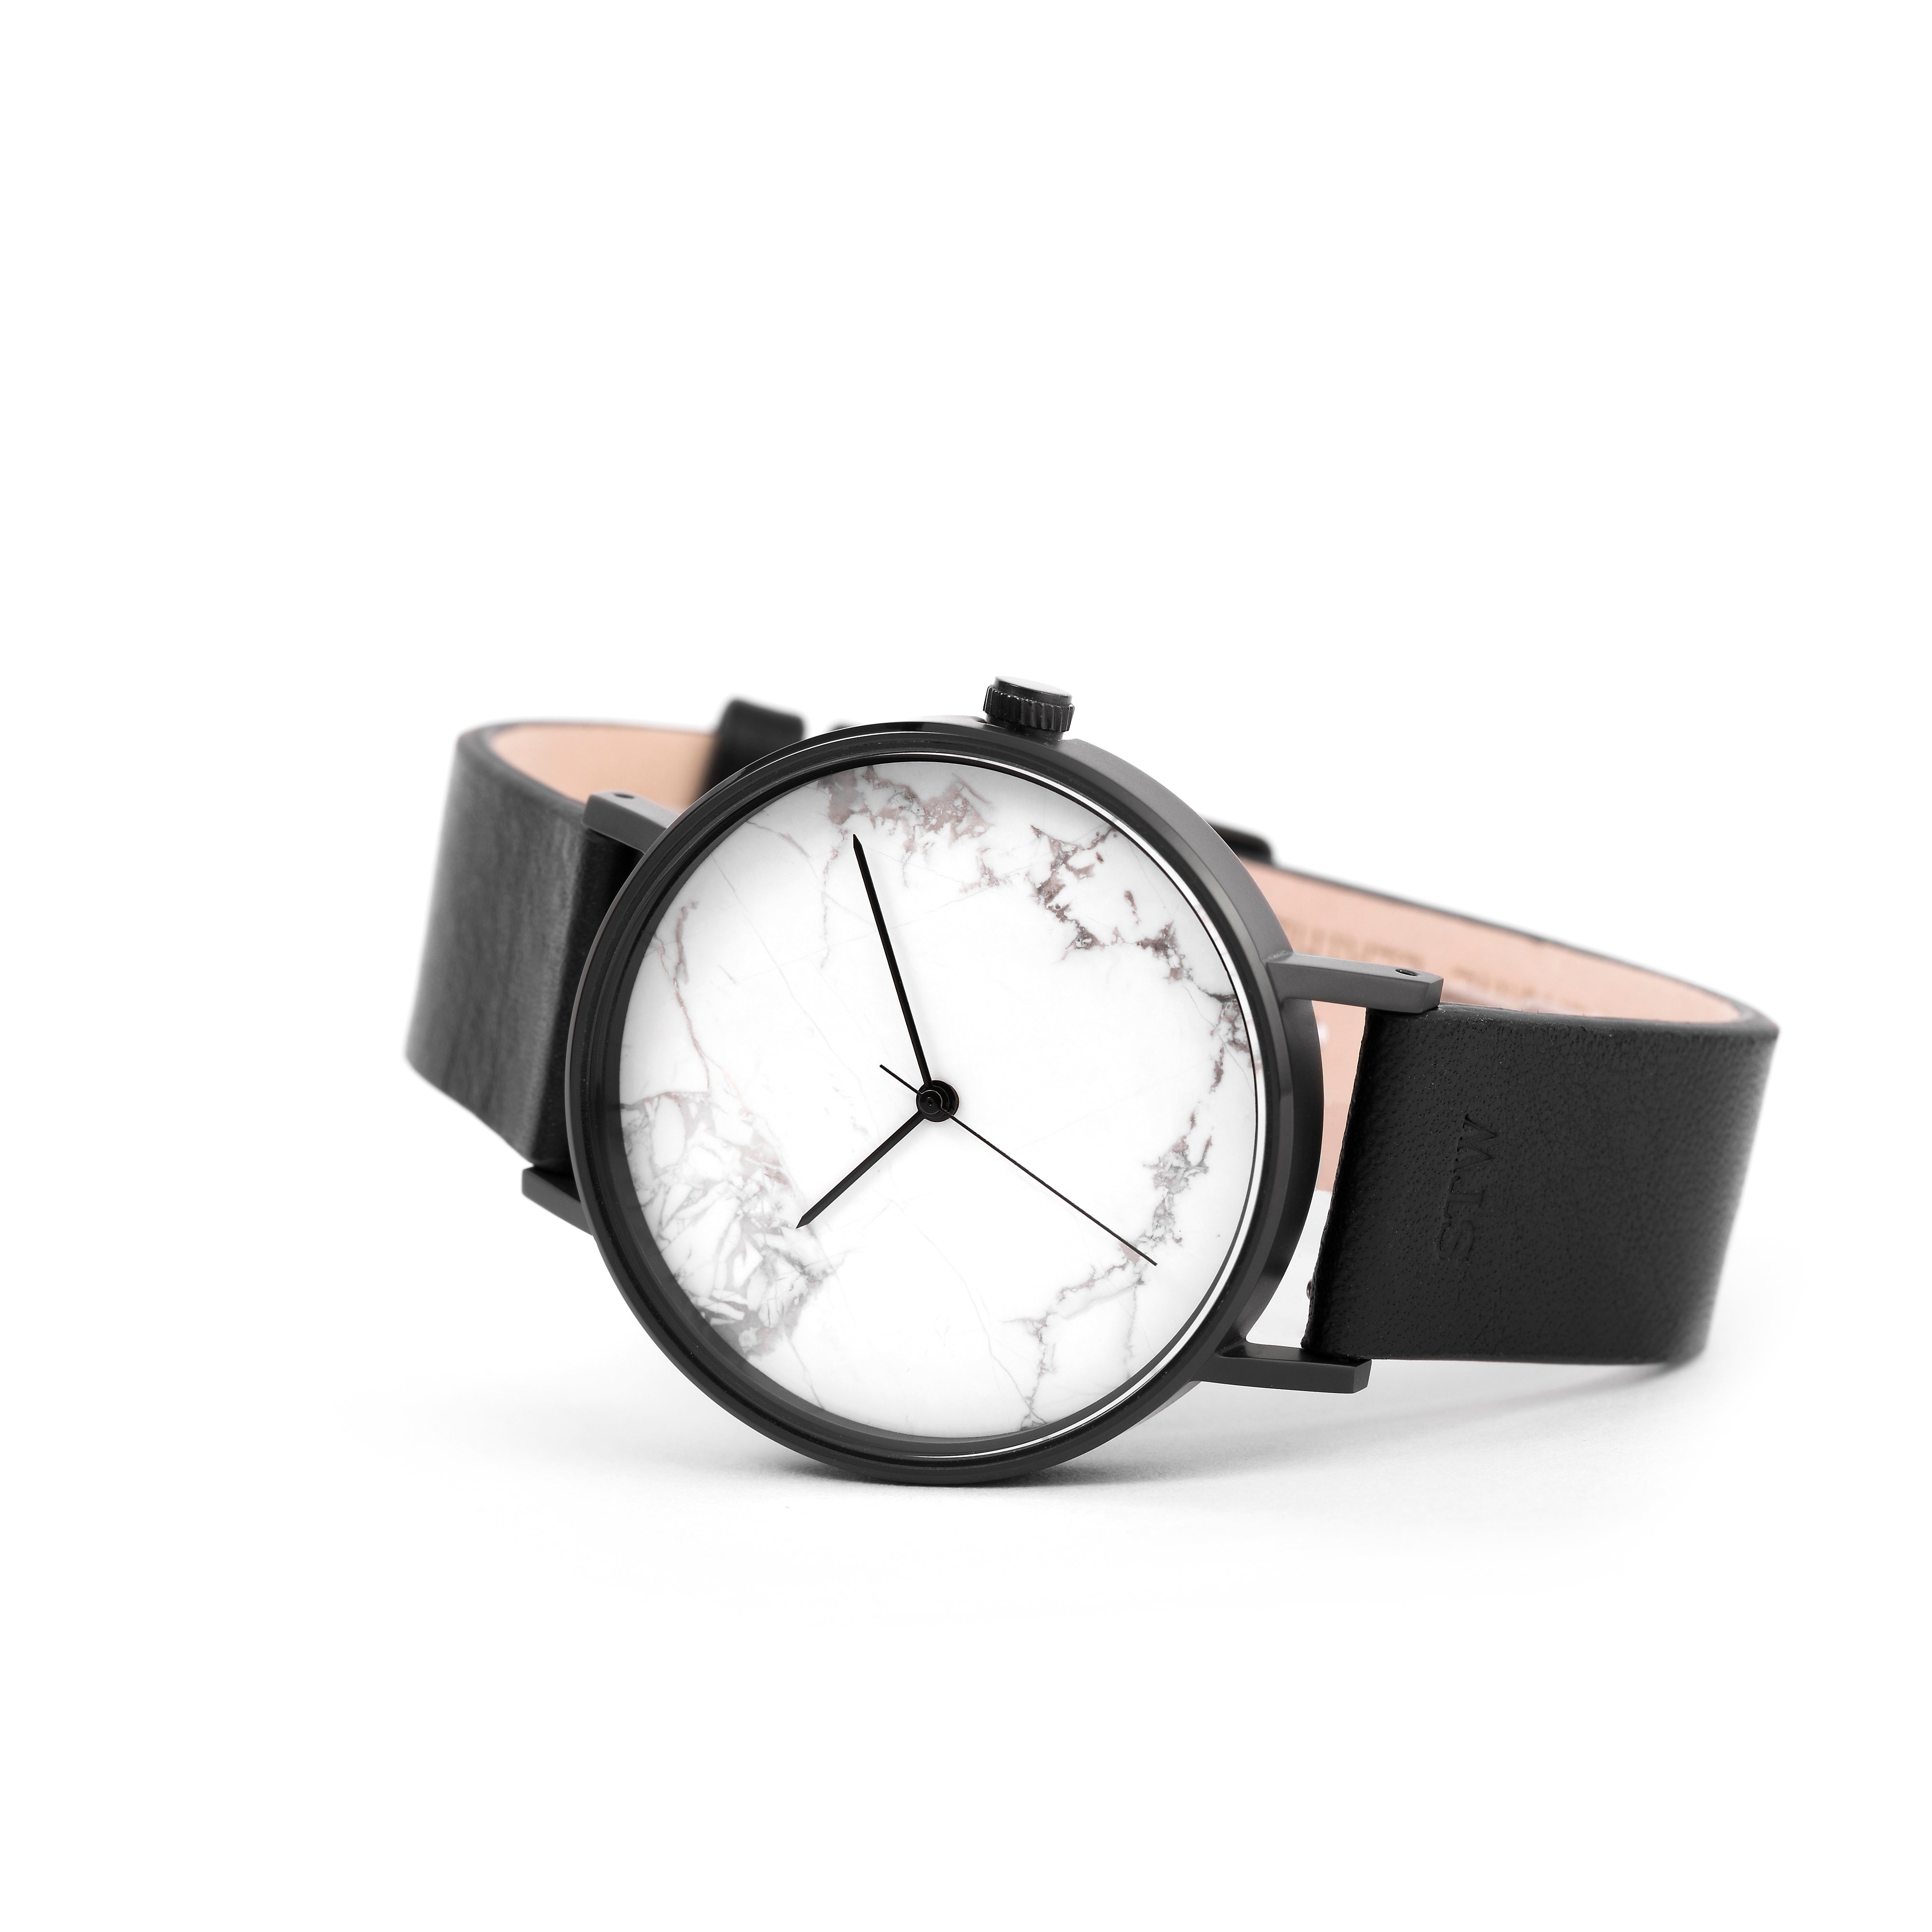 THE STONE -  WHITE MARBLE DIAL / BLACK MESH BAND WATCH